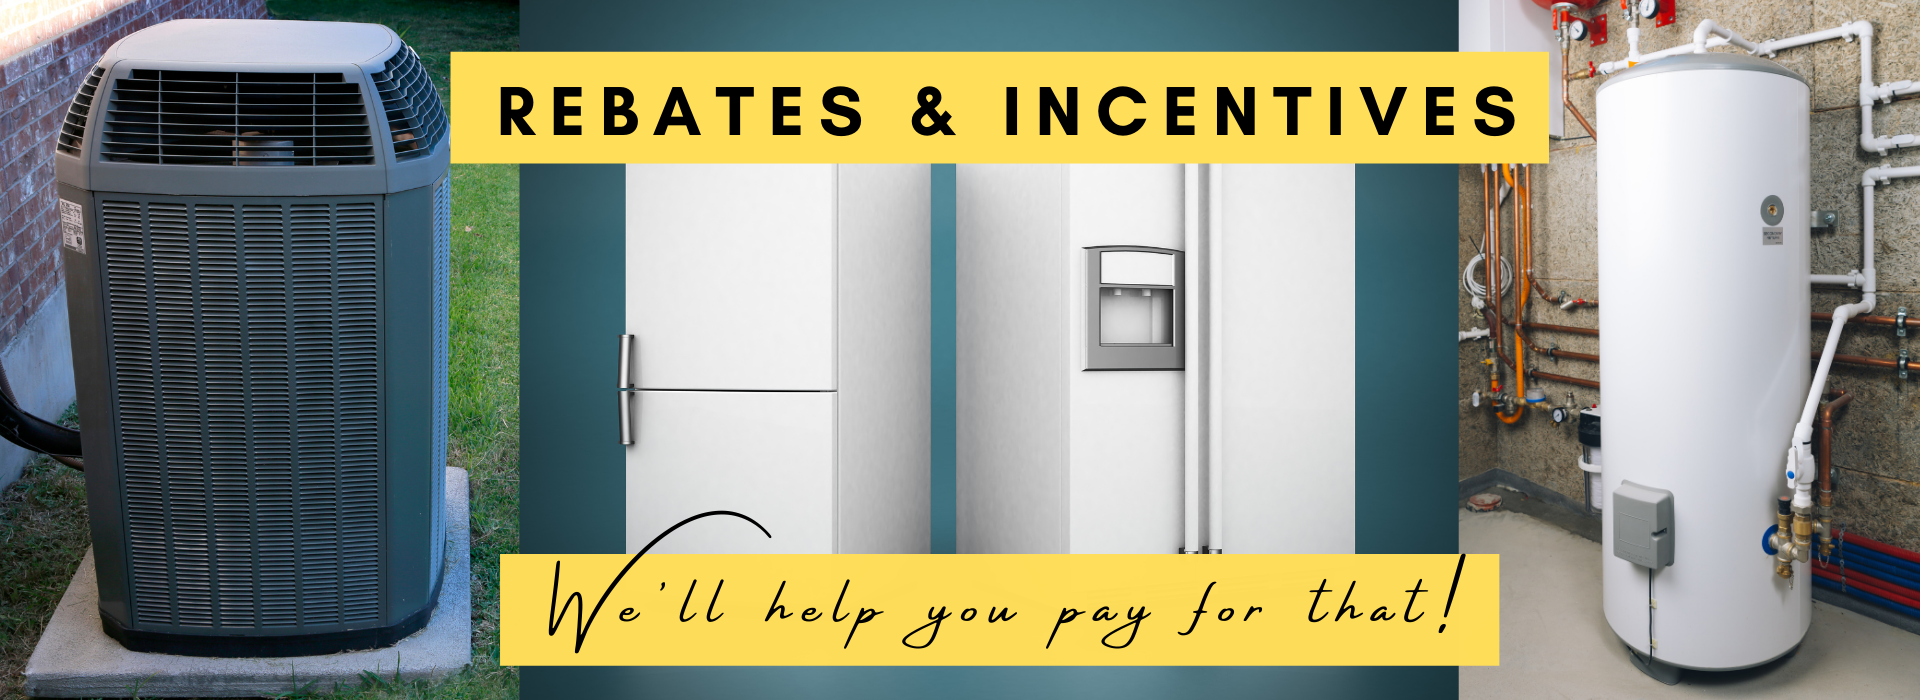 Water heater, Air conditioner, and refrigerator rebates